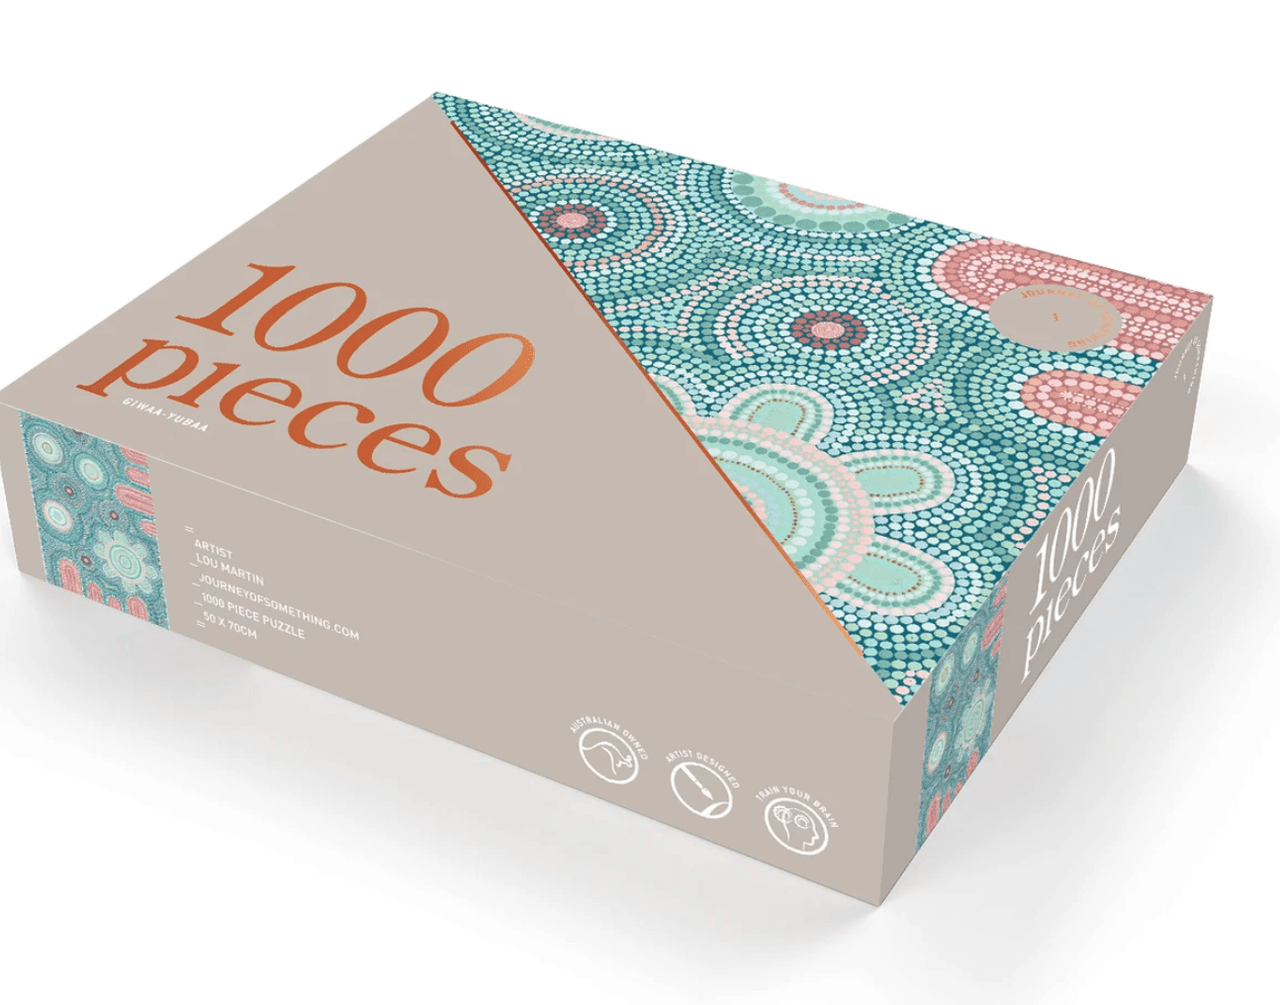 A box with the words 1000 Piece Puzzle - Giwaa-Yubaa on it.